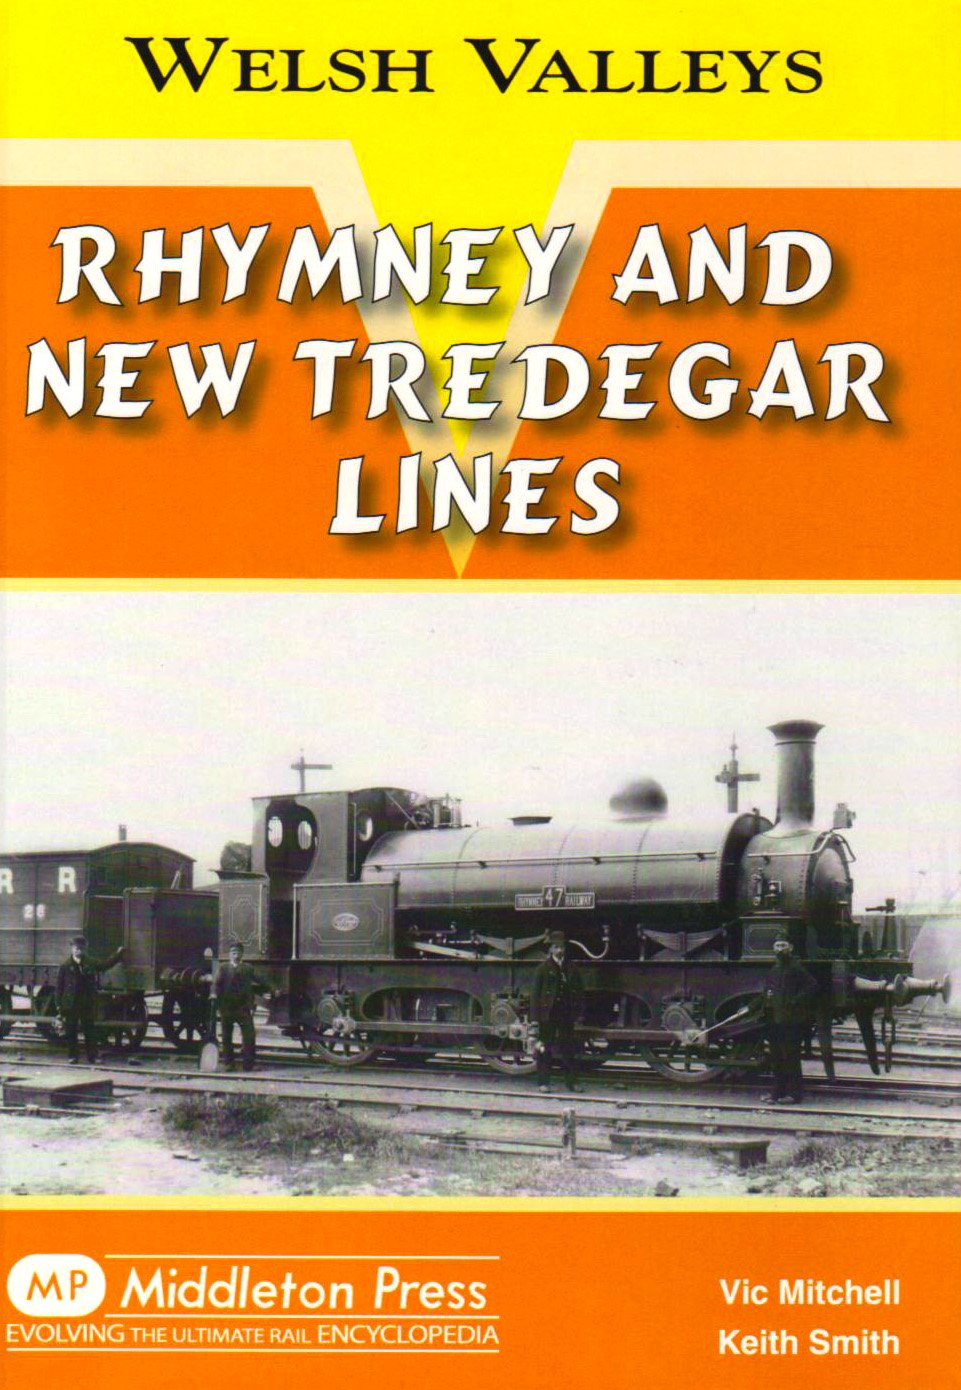 Welsh Valleys Rhymney and New Tredegar Lines